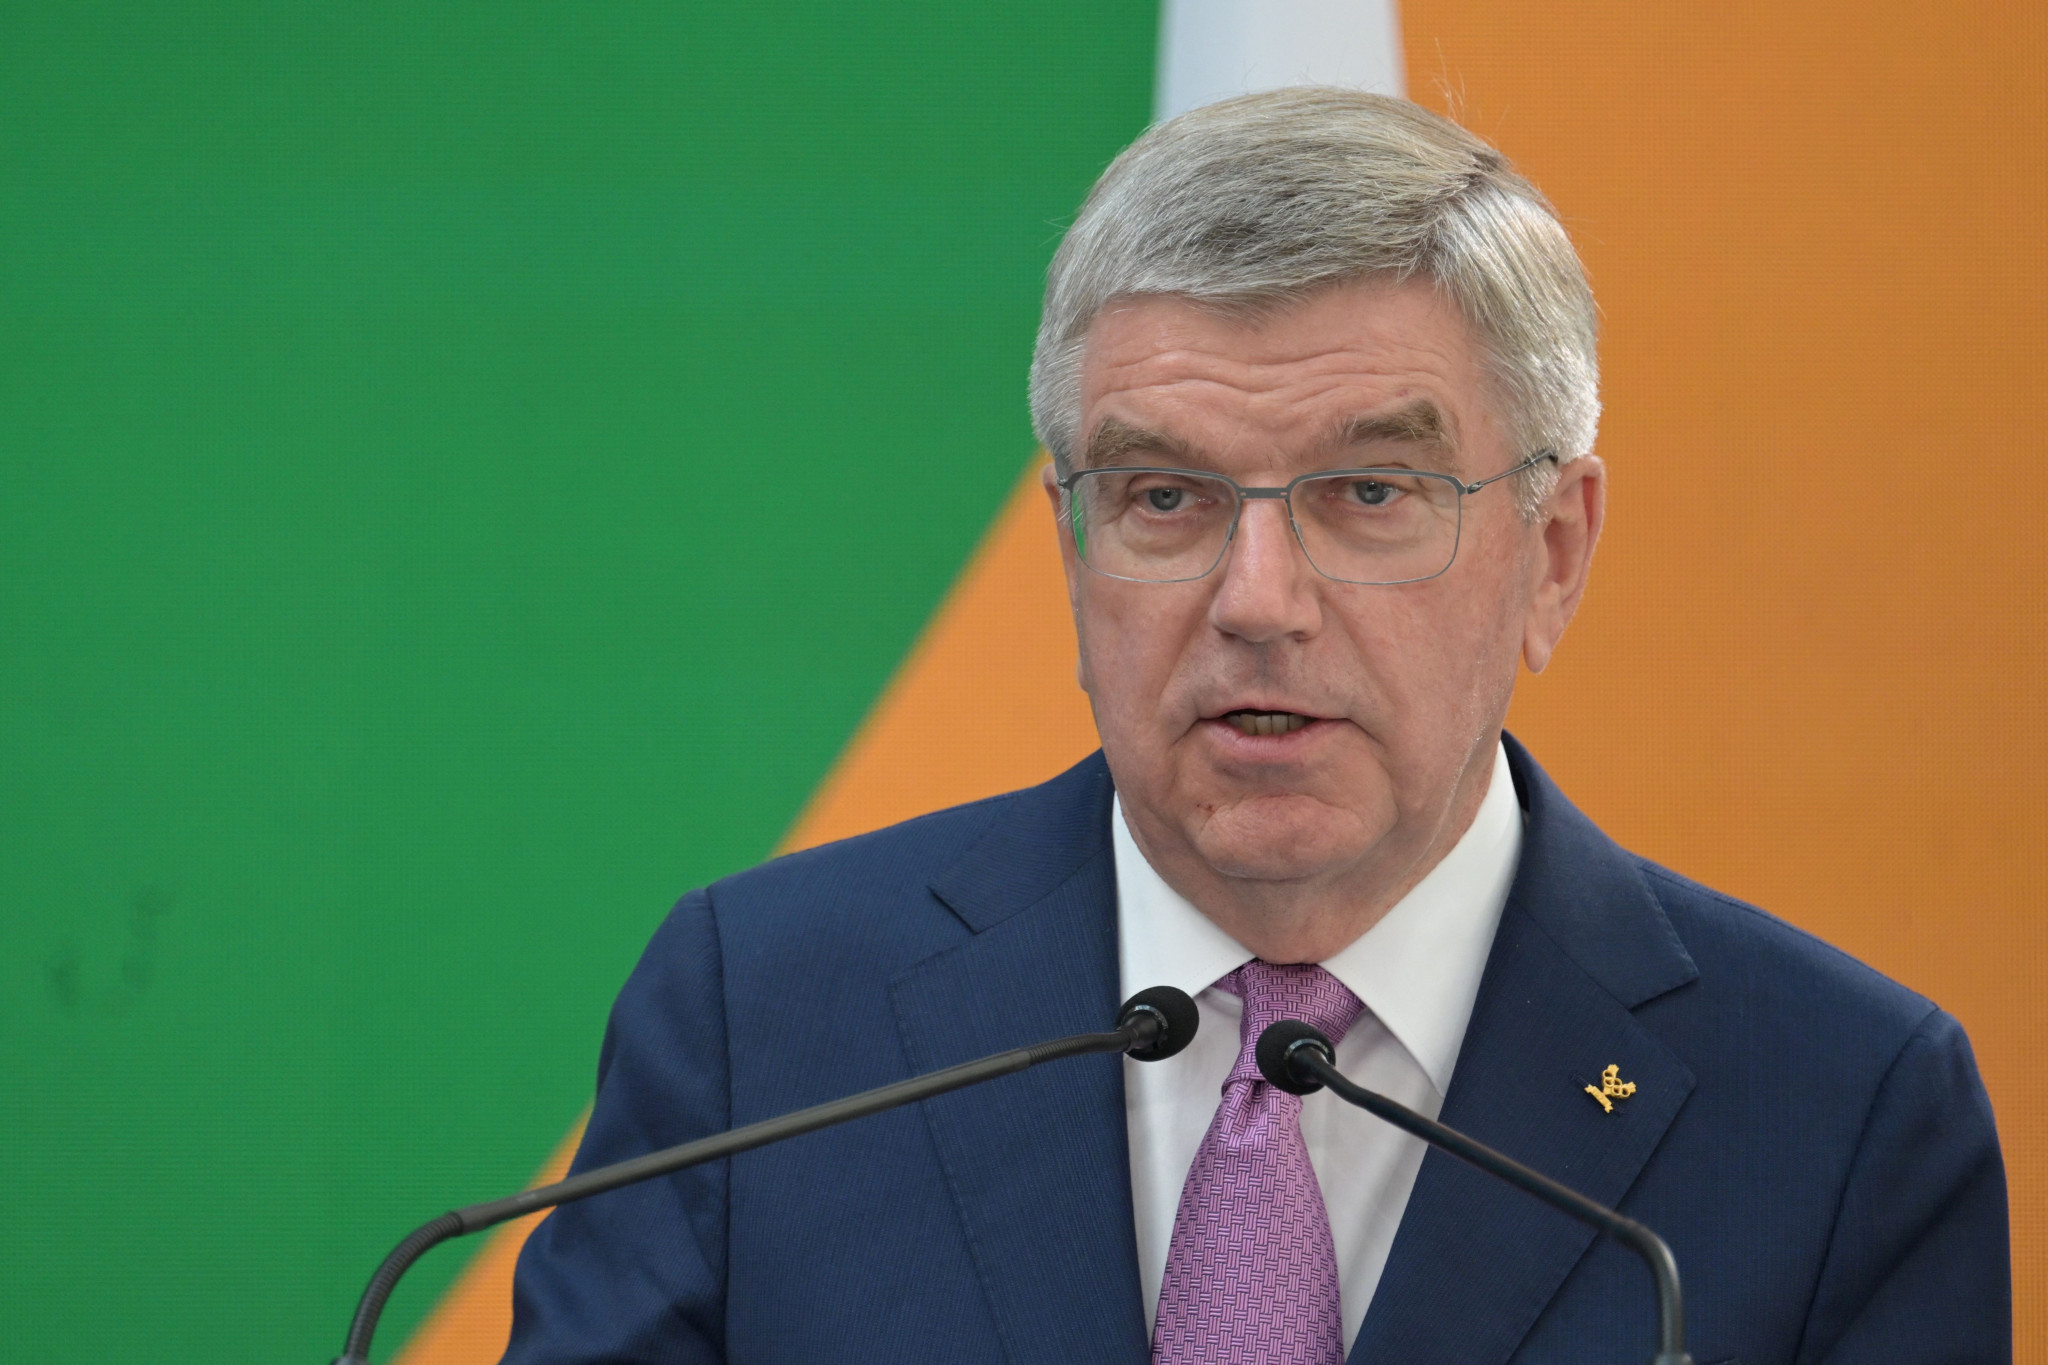 IOC President Thomas Bach is set to attend a question-and-answer session on Monday at the IOC International Athletes' Forum  ©Getty Images